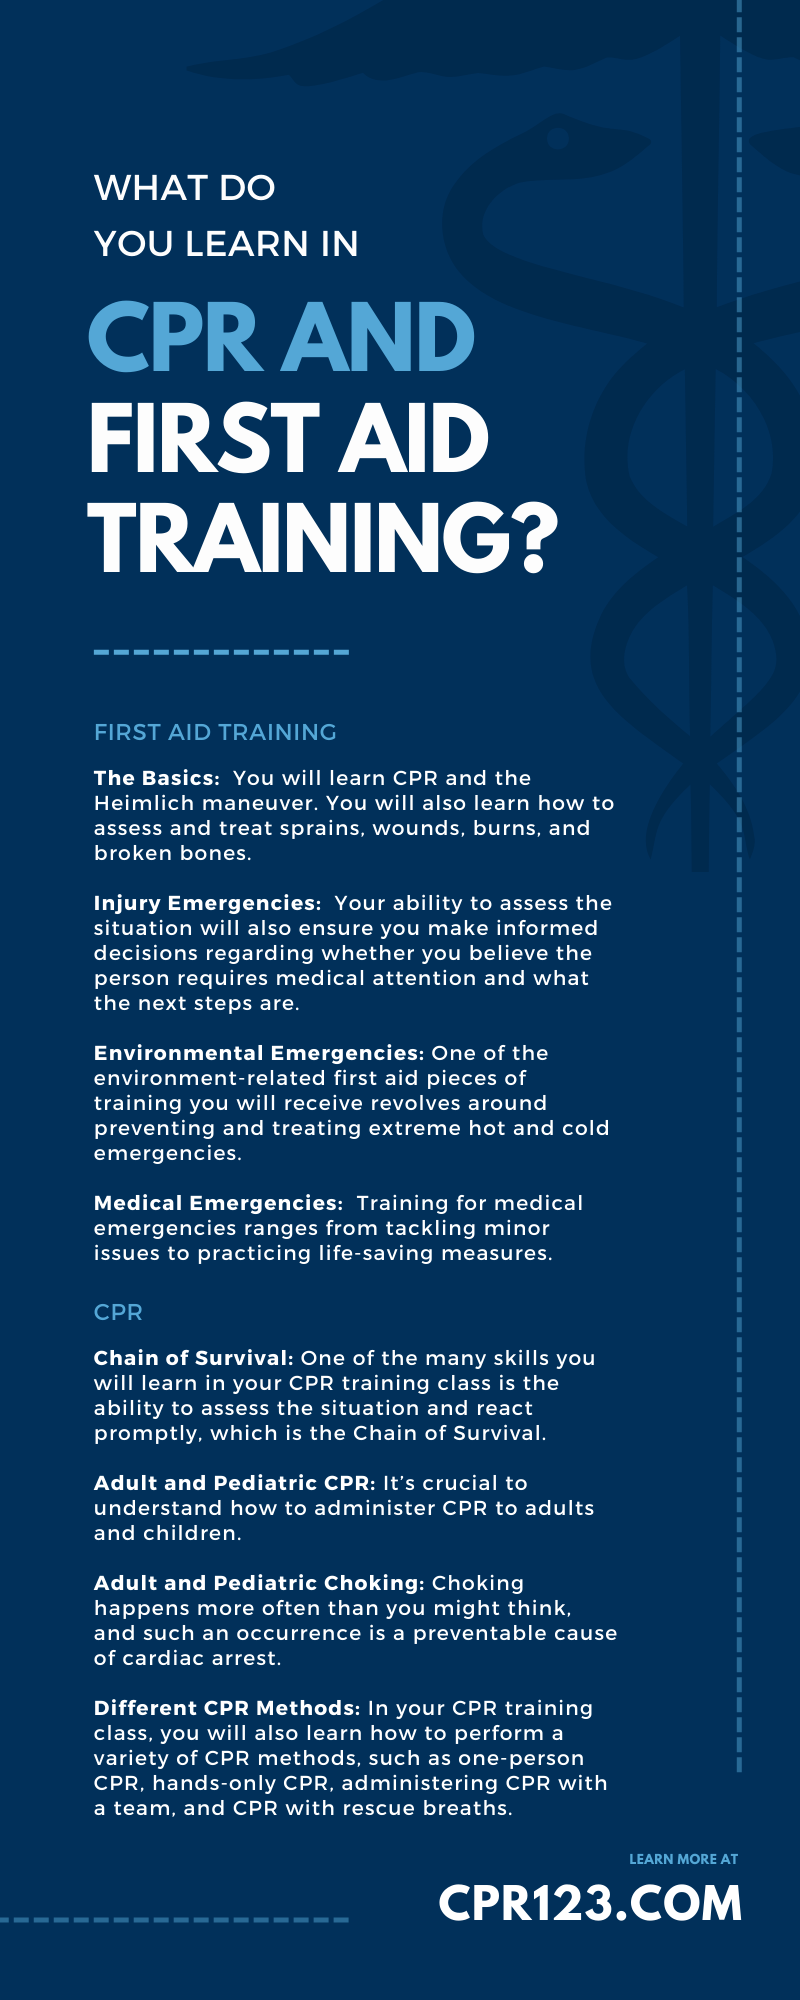 What Do You Learn in CPR and First Aid Training?